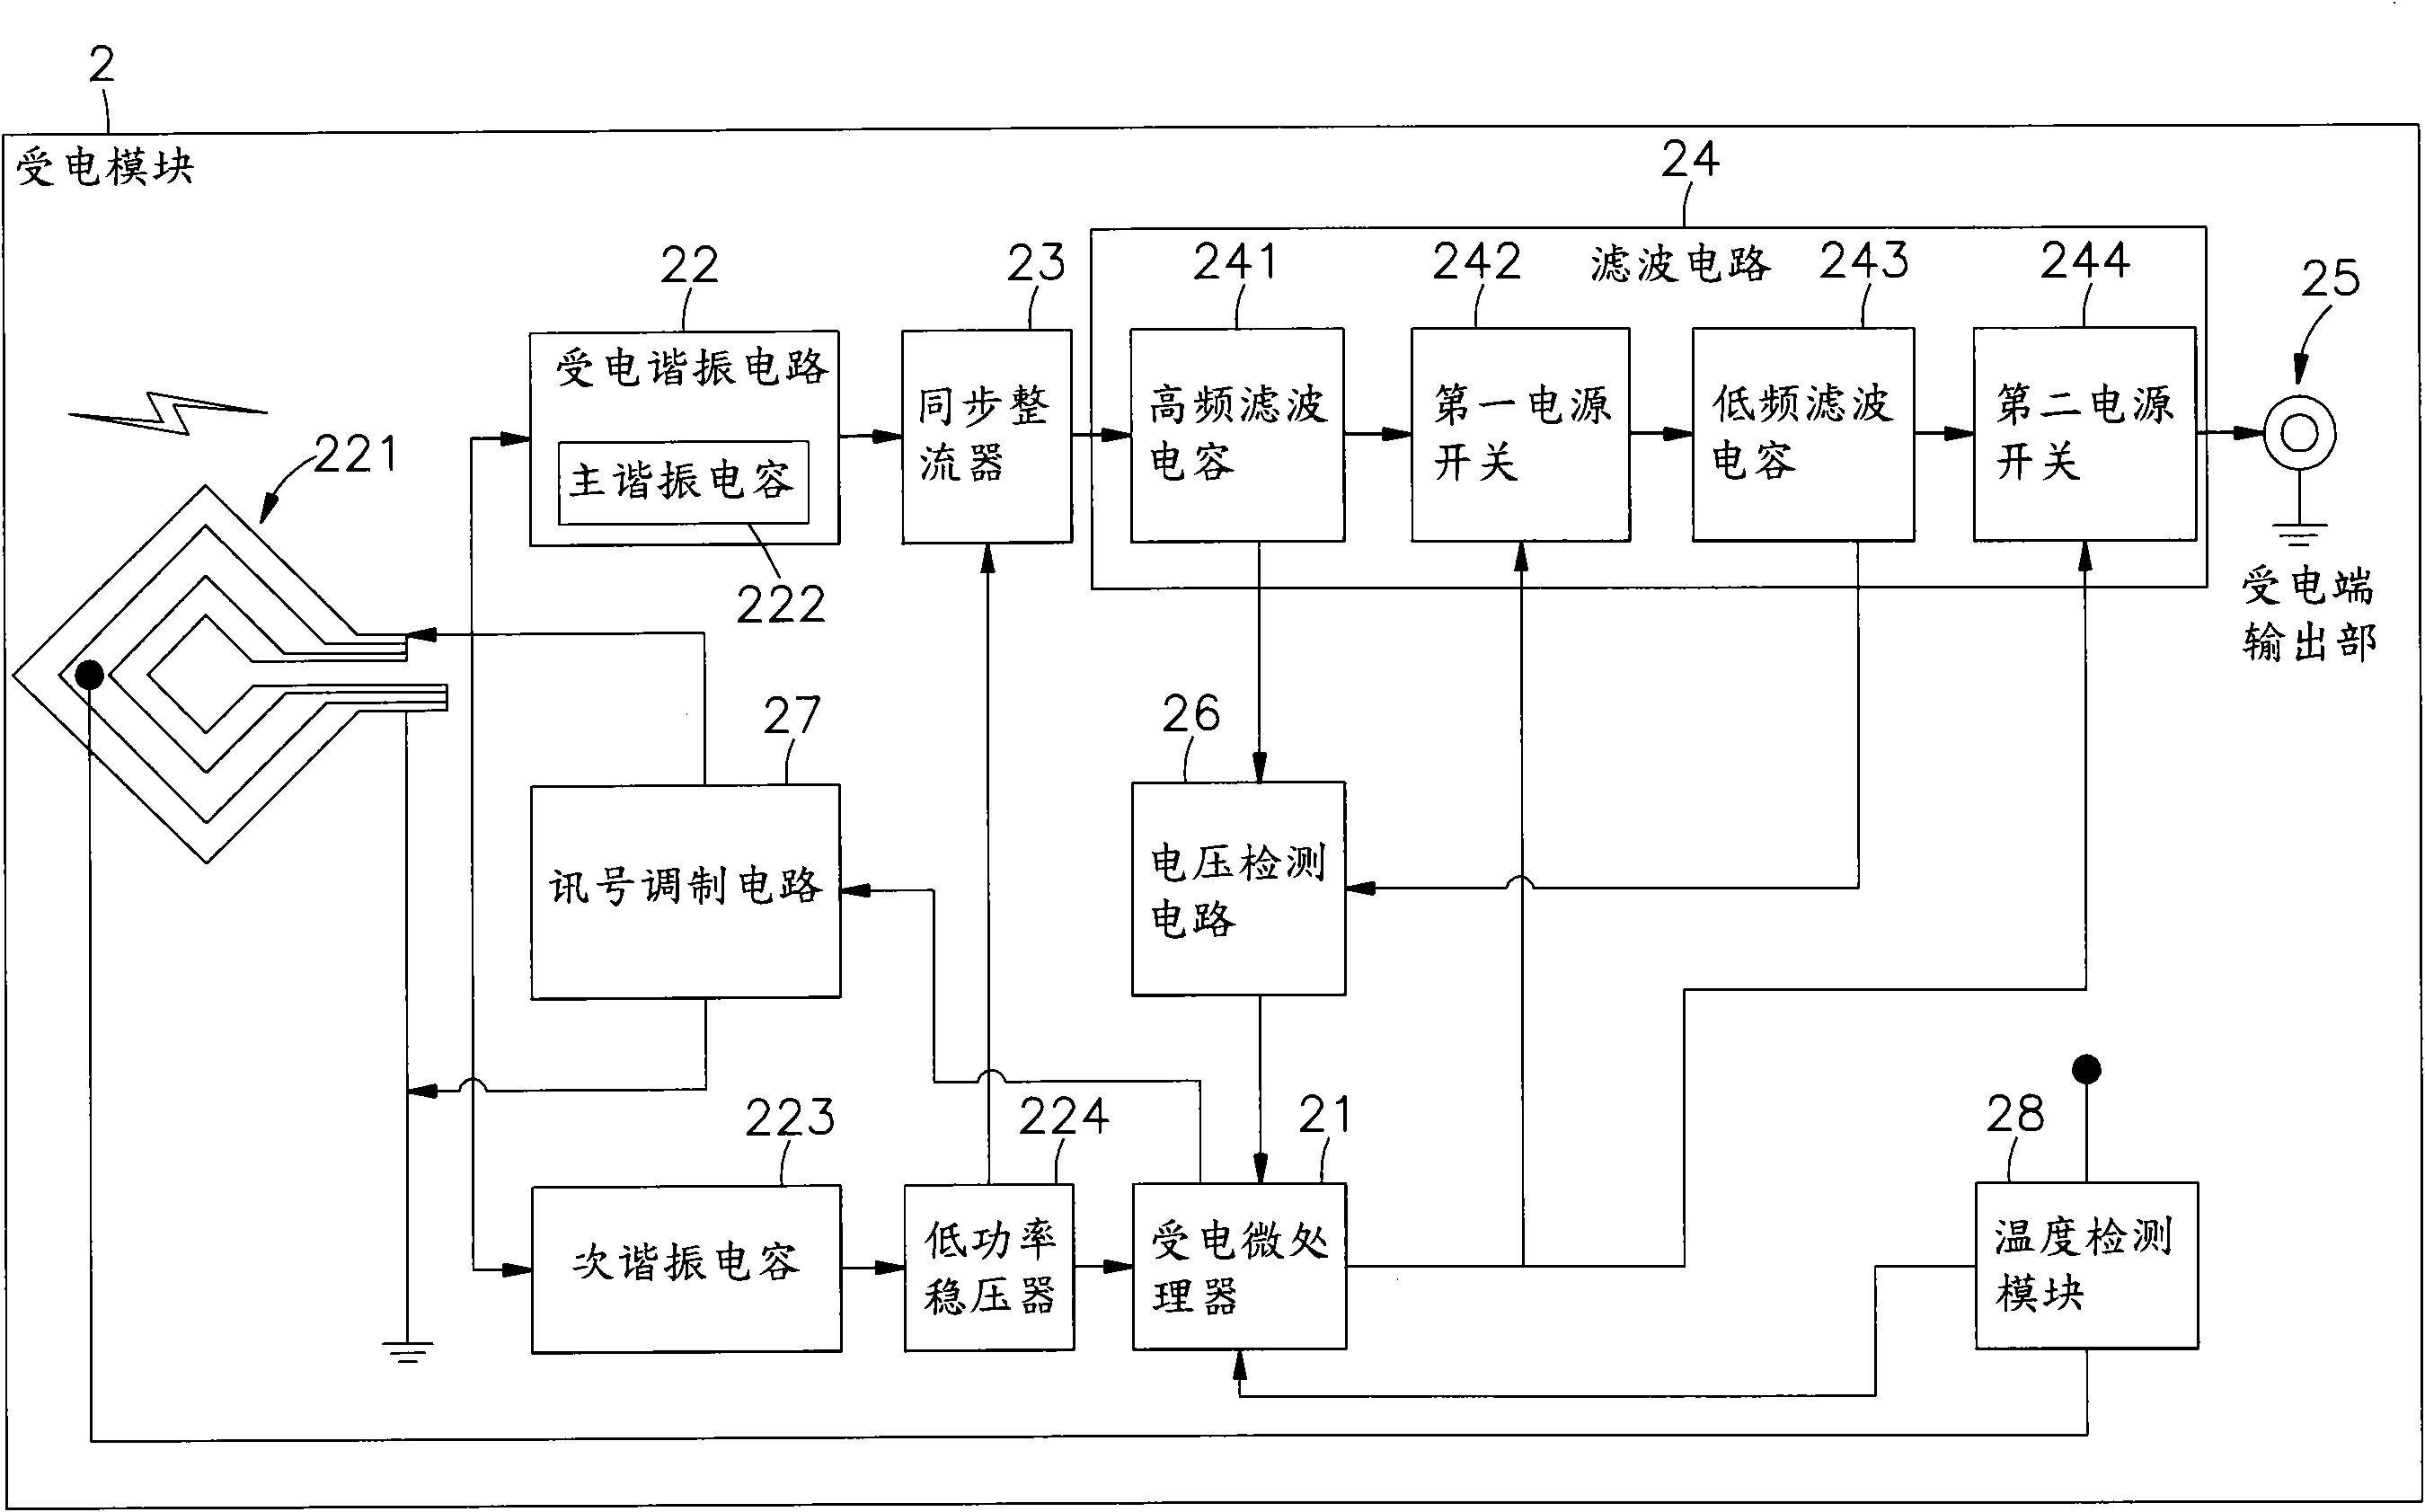 Power supply transmission method of high-power wireless induction type power supplier